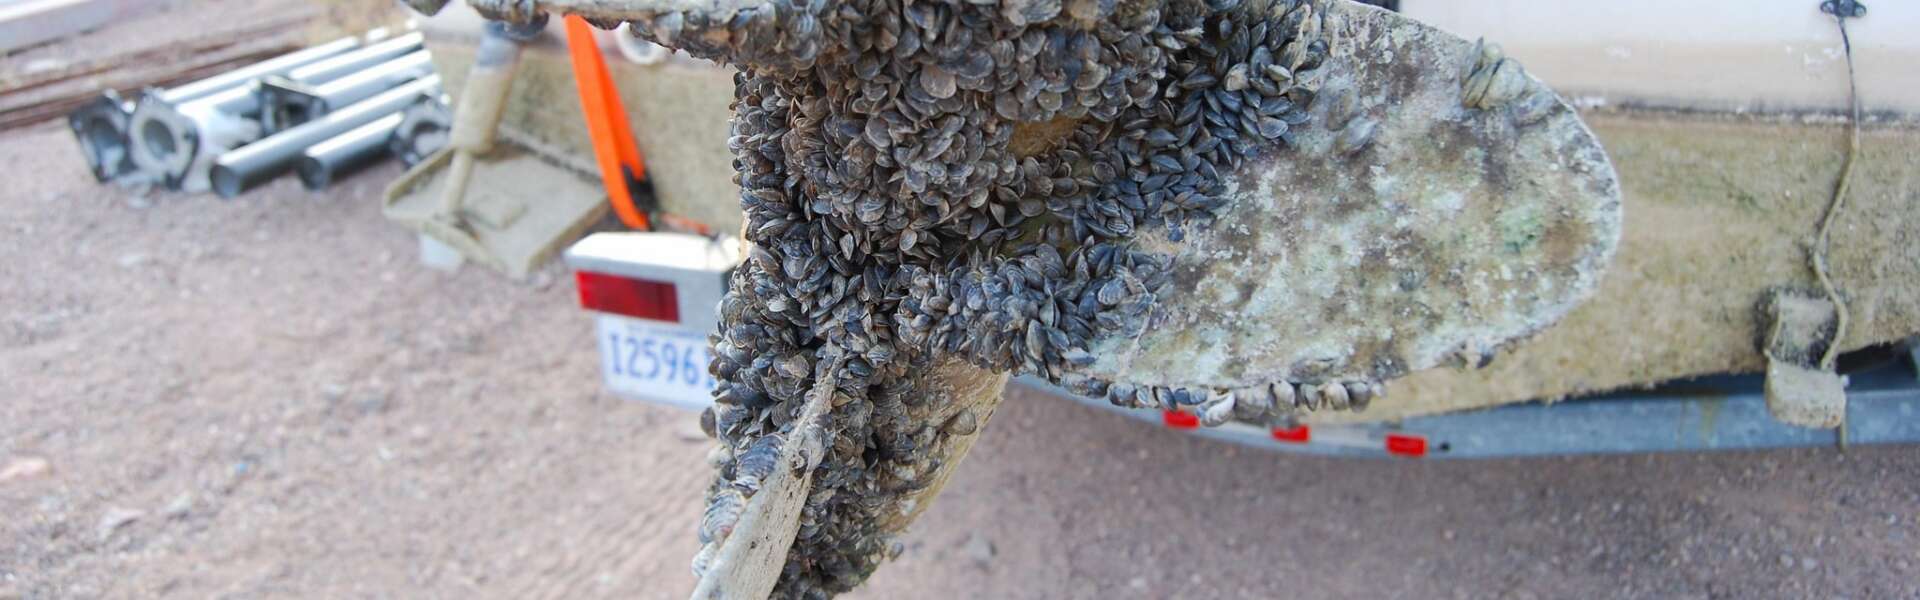 Zebra mussels are seen encrusted on a boat propeller